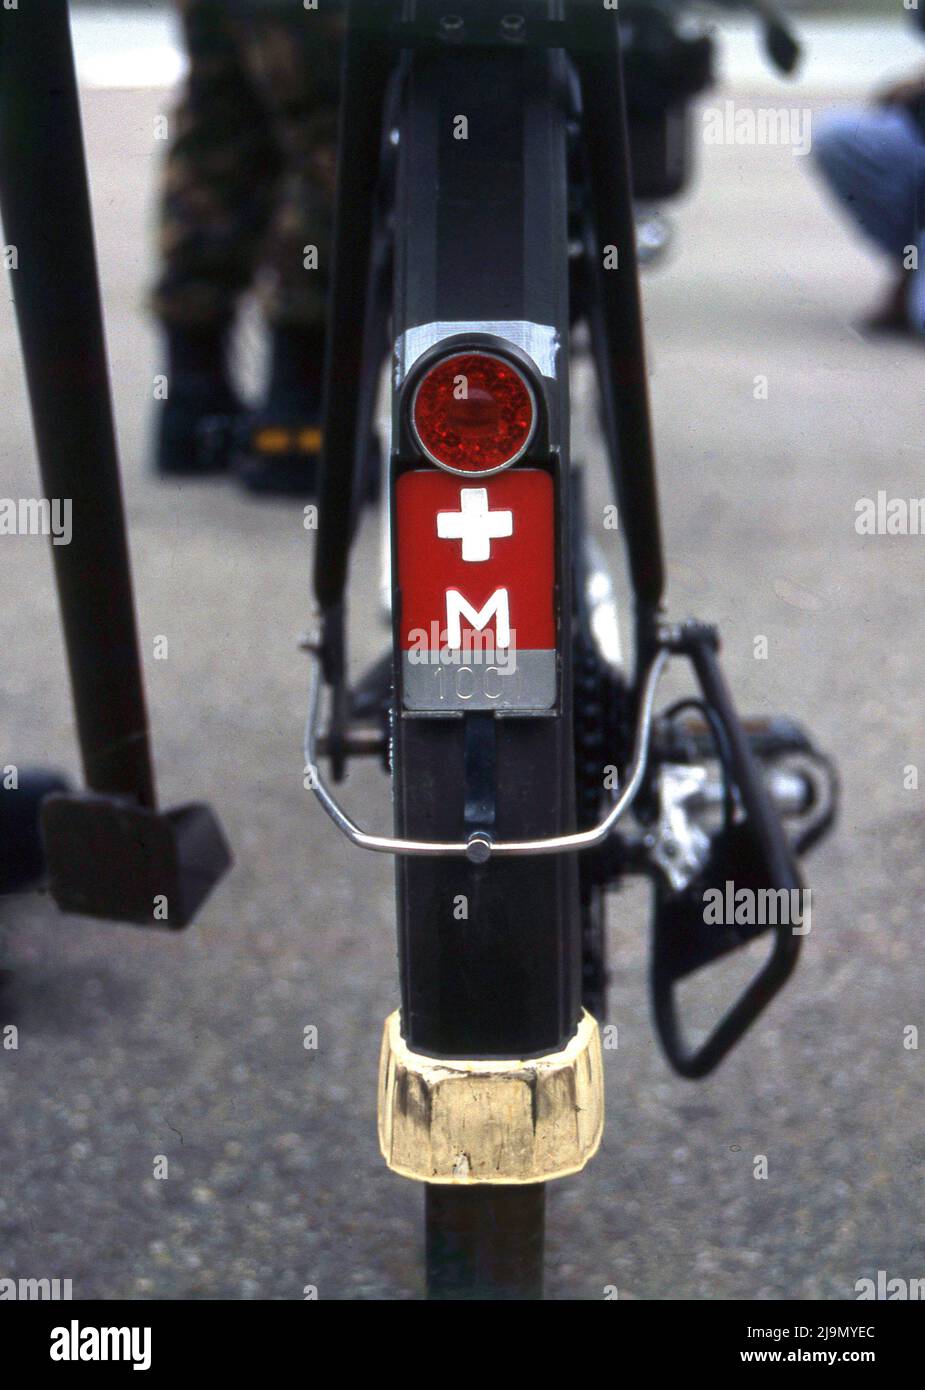 circa 2000, the Swiss army bicycle, MO-93, rear view showing national flag. This bicycle was the first major development on the original MO-05, introduced in 1905. The Swiss army bicycle or velo militaire has been a part of the national defence of Switzerland for a hundred years, as a form of transport, that if needed,  could move swiftly to defend against invading forces. It's use in the Swiss Army dates back to 1891 and although there was talk in 2001 of phrasing them out, a new Swiss Army bike, the MO-12 was introduced in 2012. Stock Photo